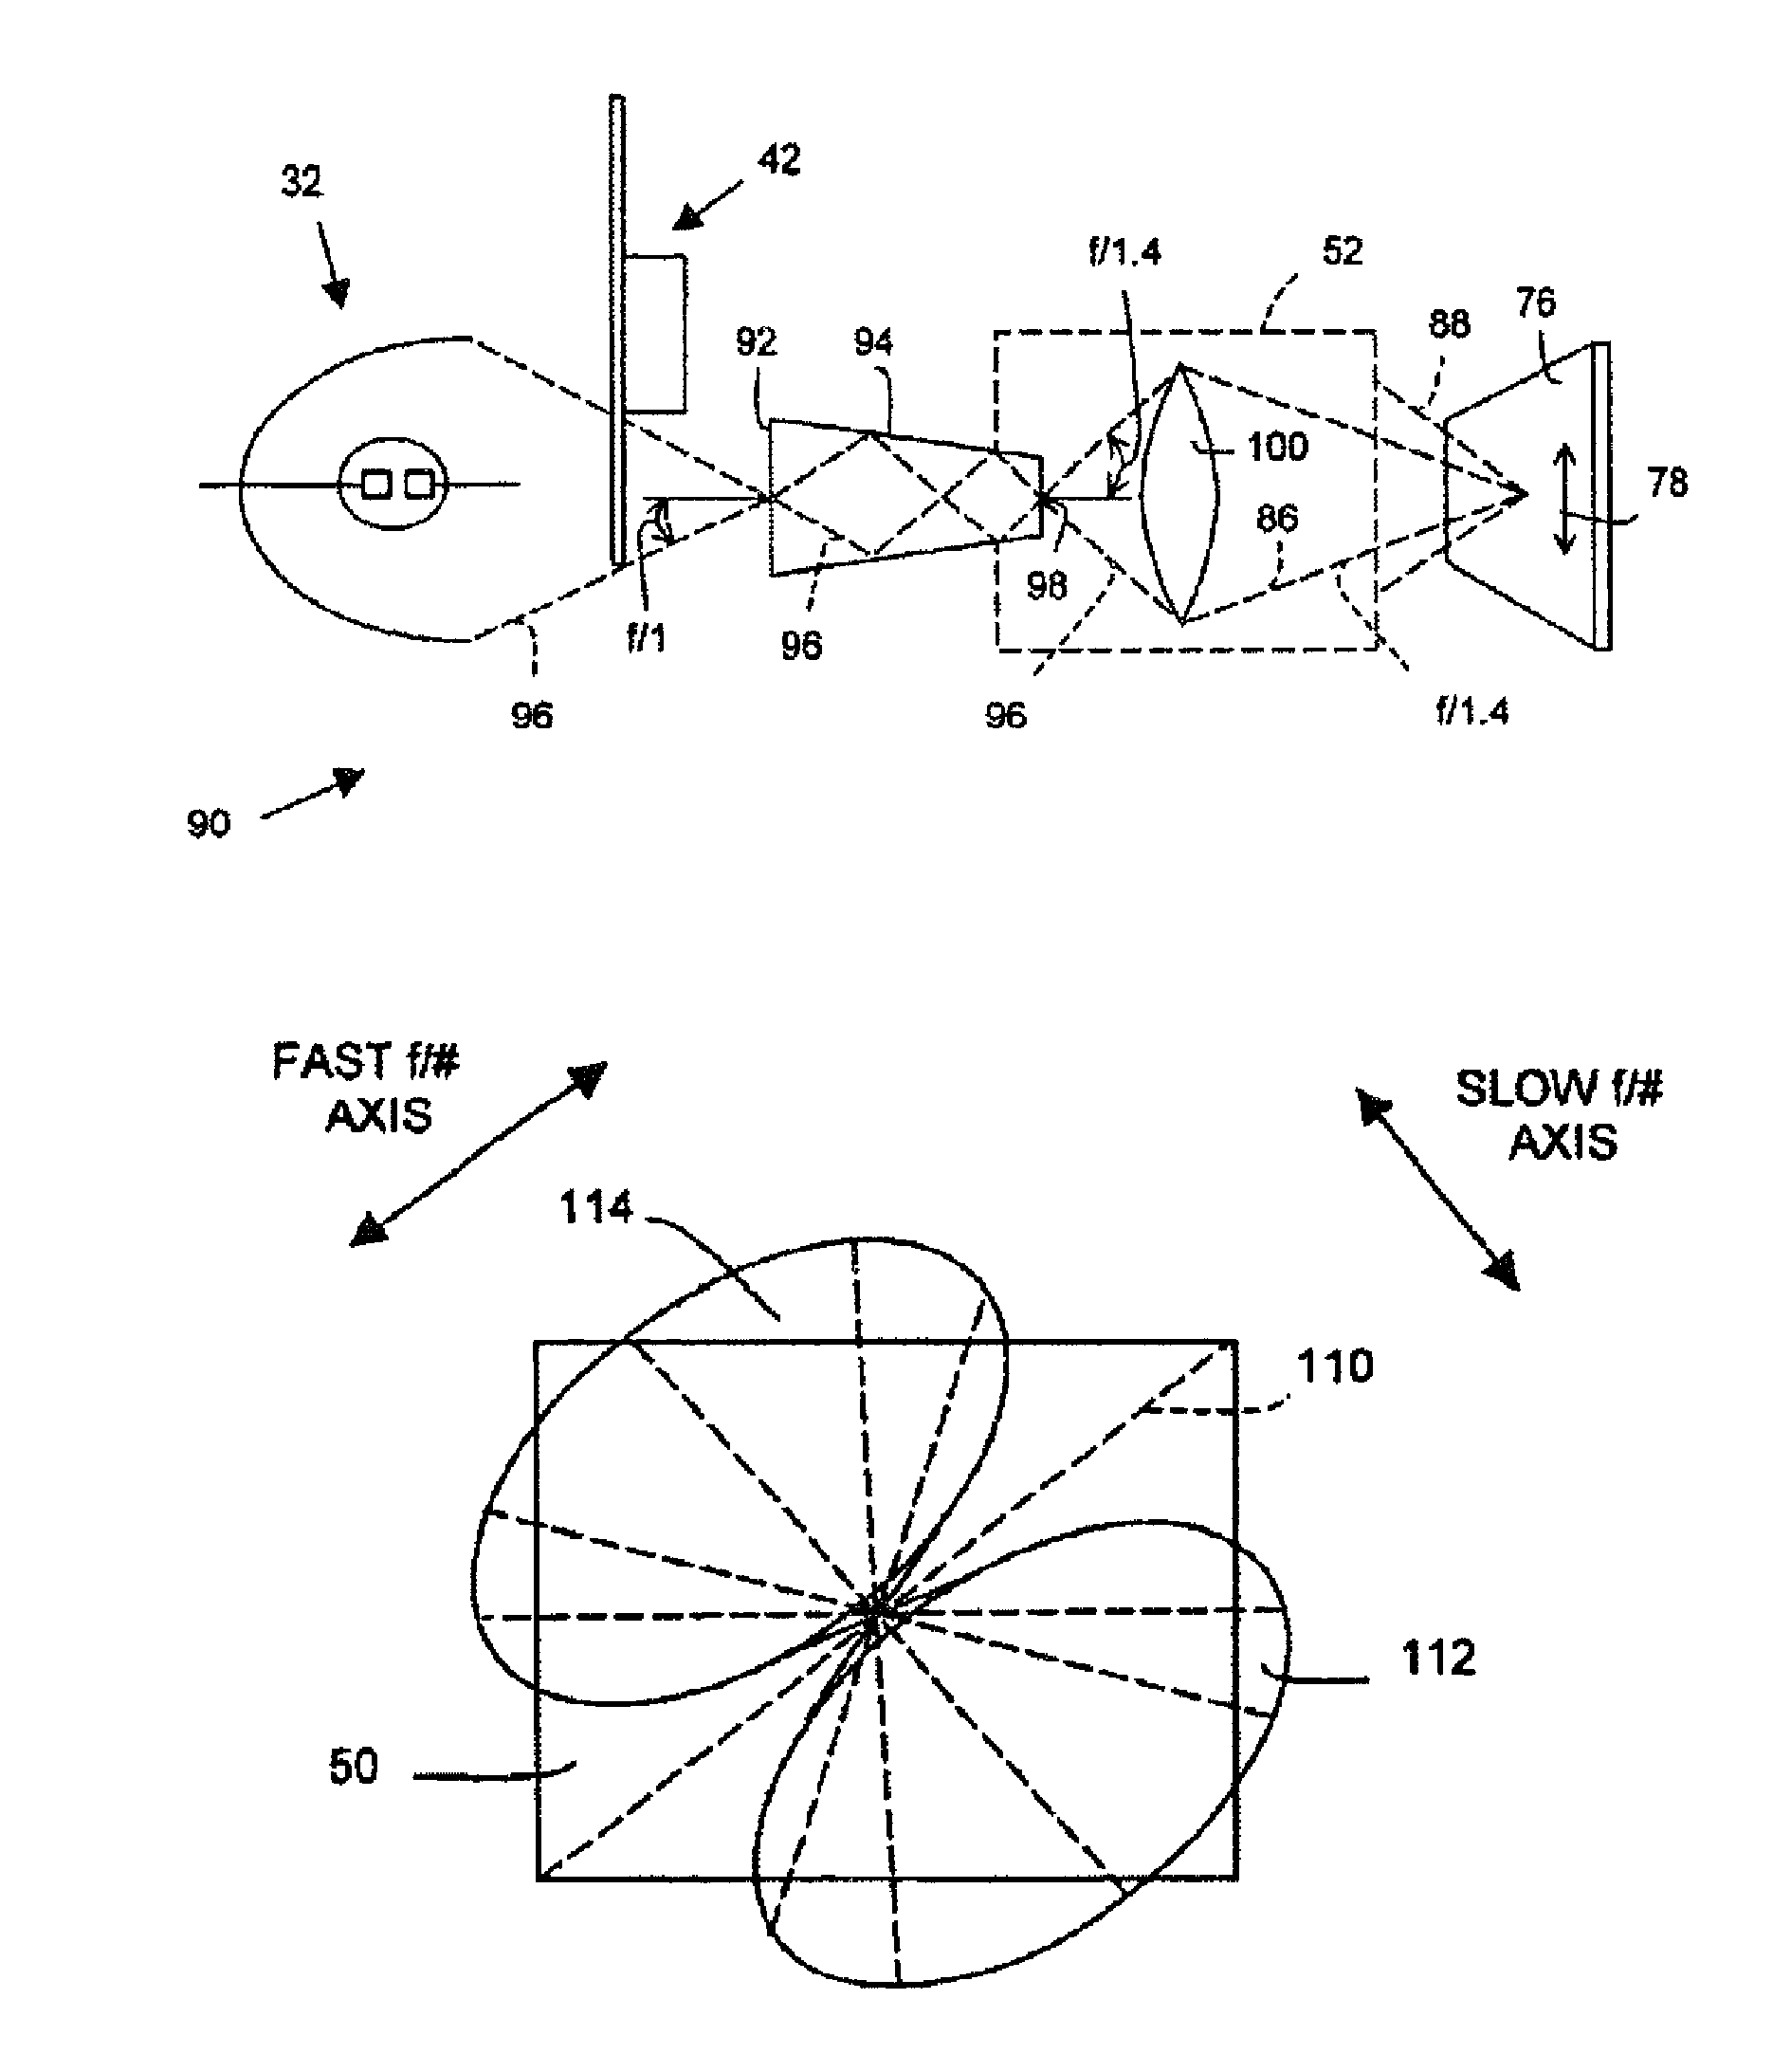 Anamorphic illumination of micro-electromechanical display devices employed in multimedia projectors